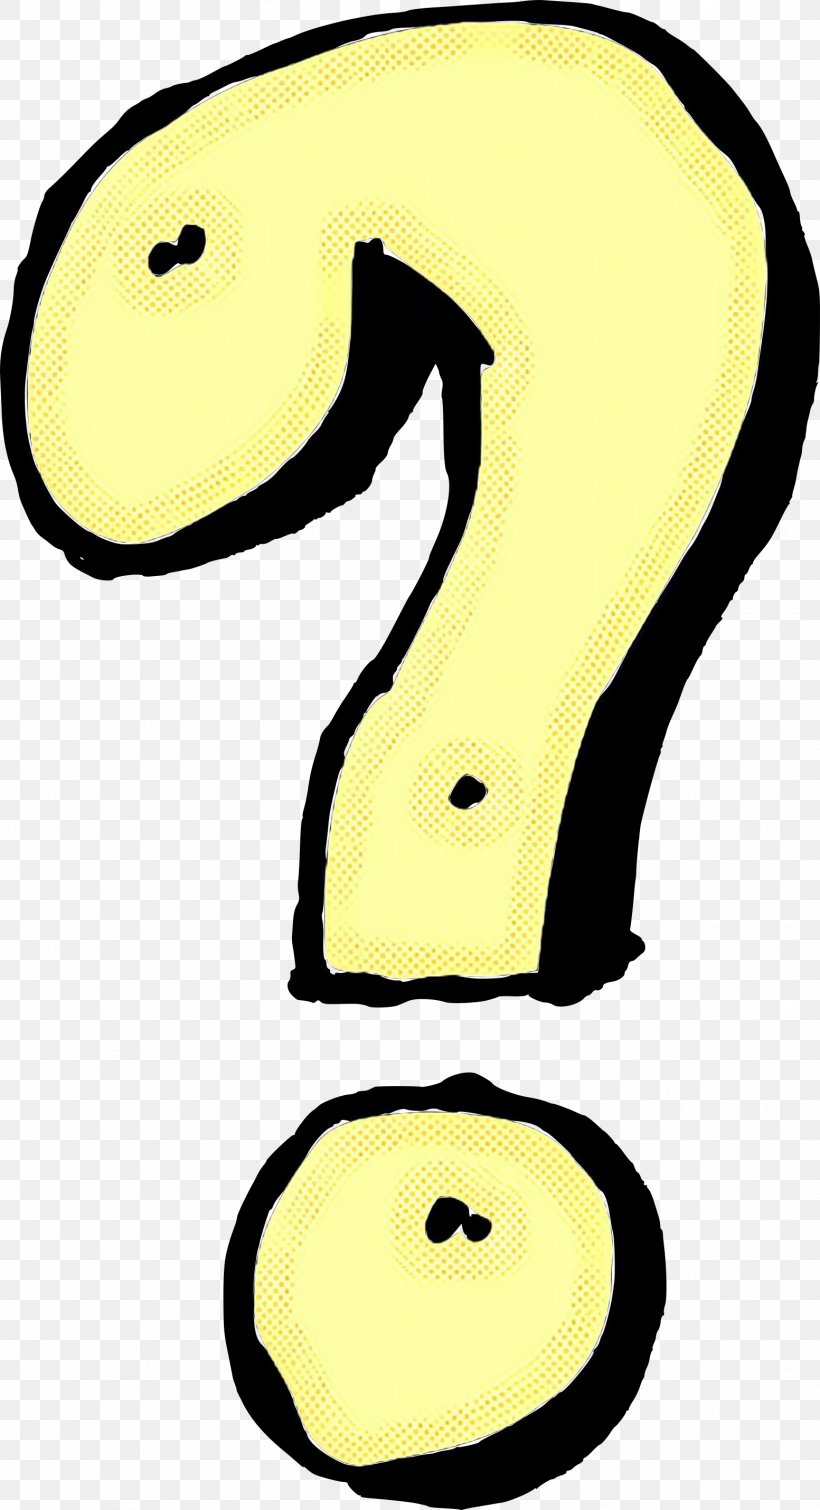 Clip Art Question Mark Transparency, PNG, 1553x2860px, Question Mark, Exclamation Mark, Number, Punctuation, Question Download Free